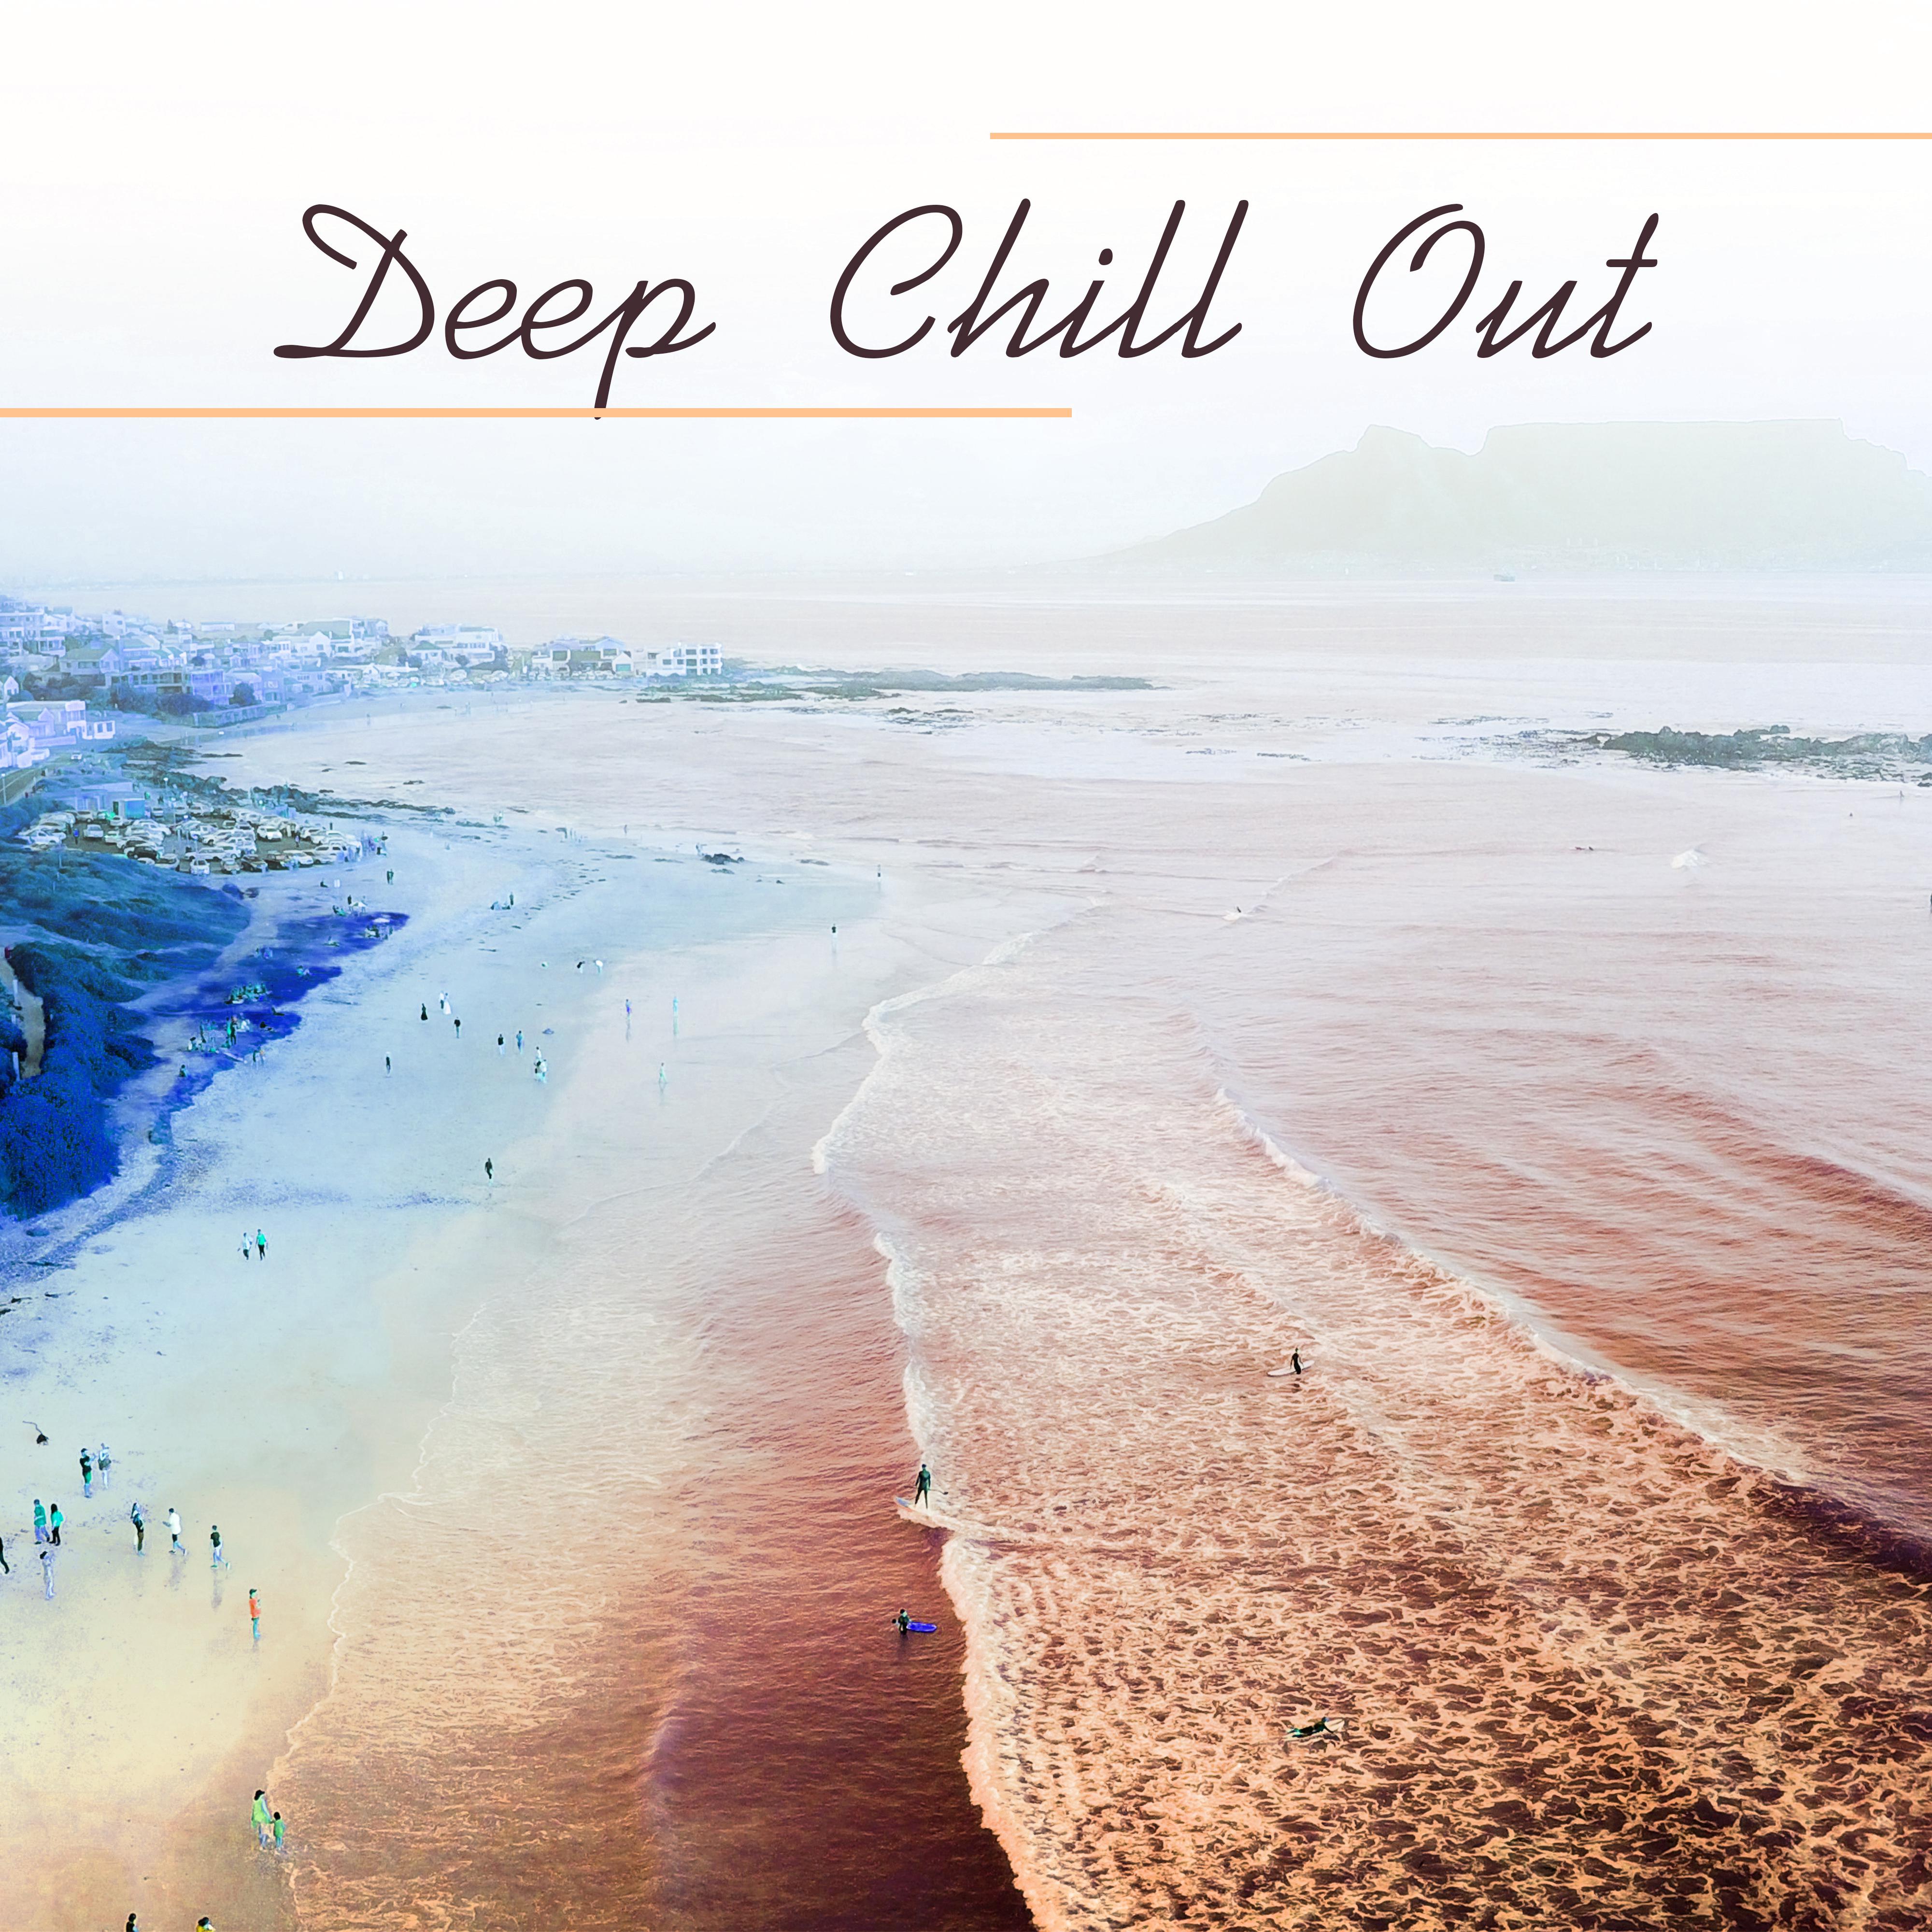 Deep Chill Out – Calm Sounds to Rest, Easy Listening, Chill Out Relaxation, Summer Waves